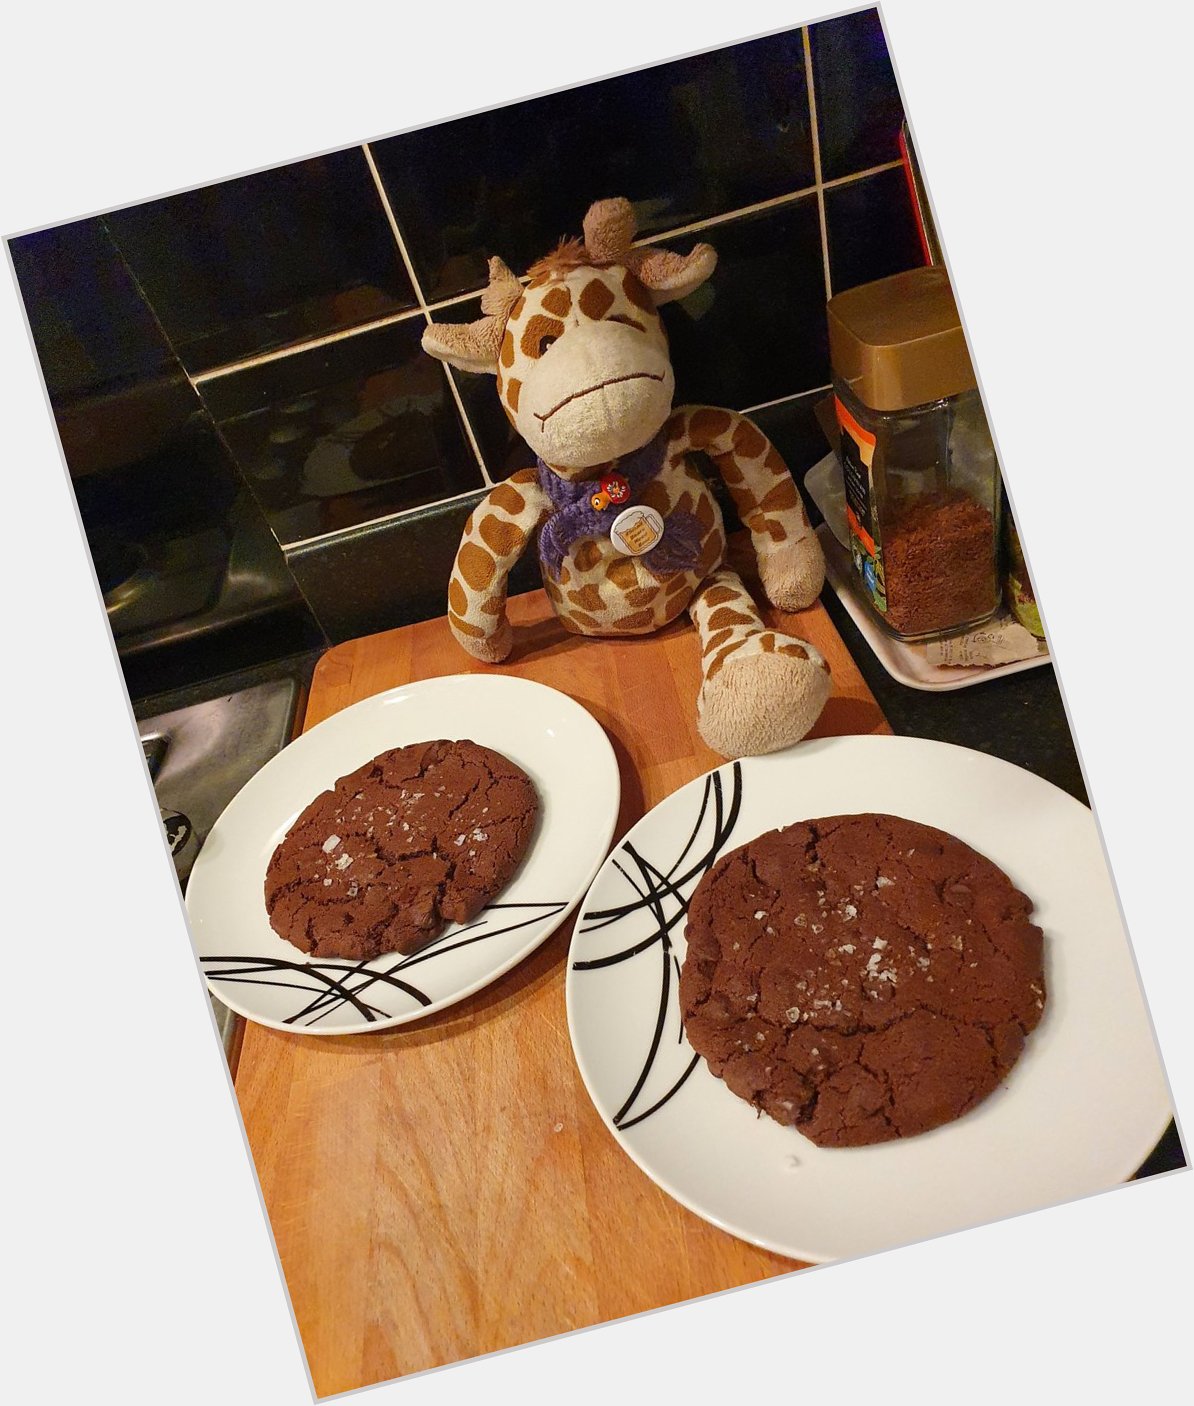 Happy birthday male human. We made these giant cookies from new book to celebrate. 